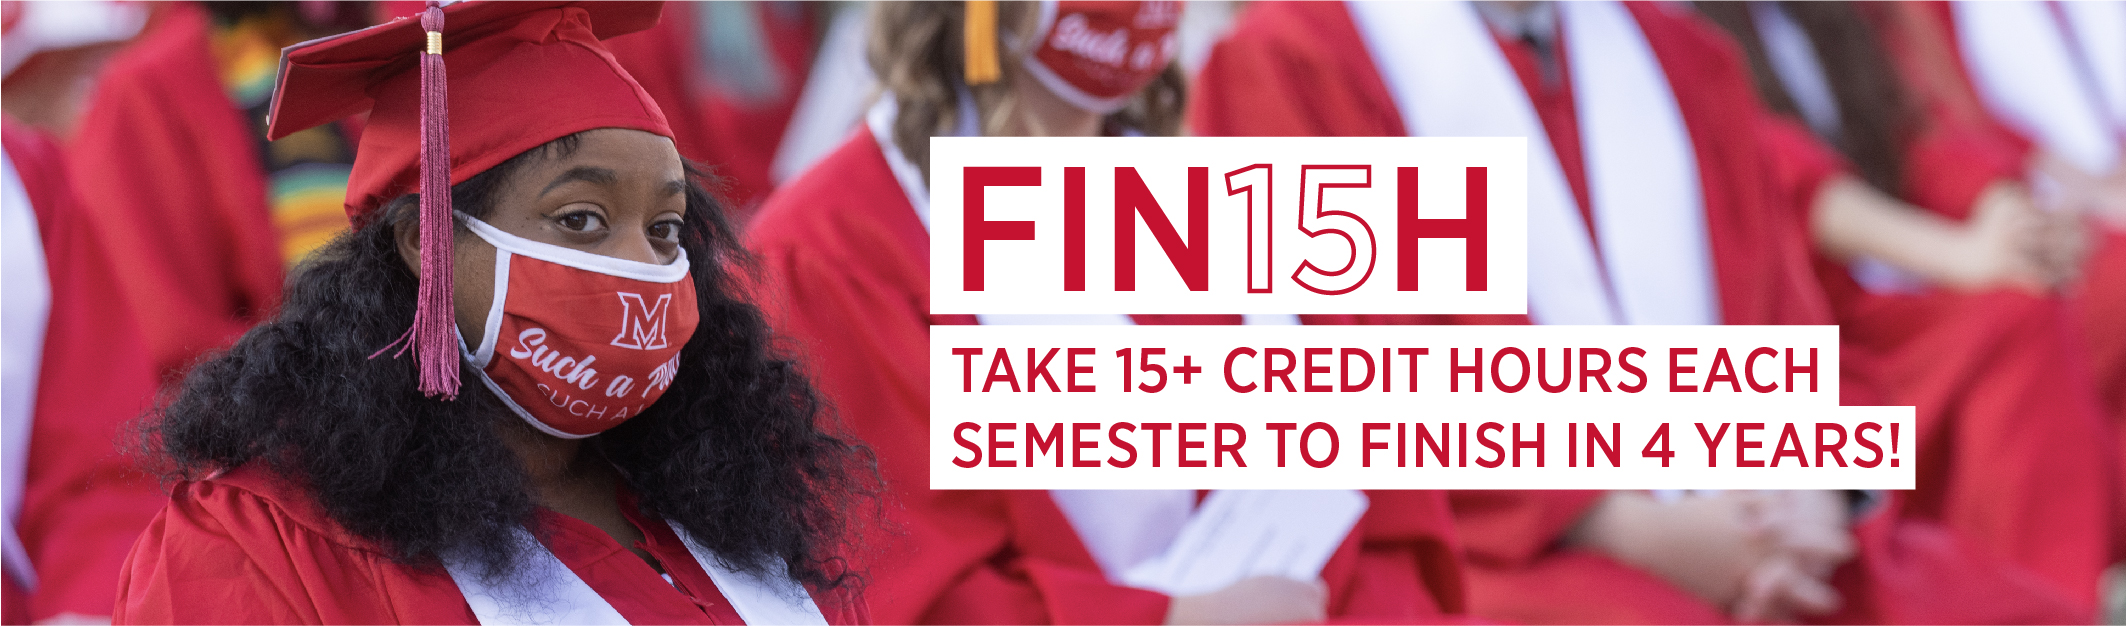 FIN15H. Take 15+ credit hours each semester to finish in 4 years. 